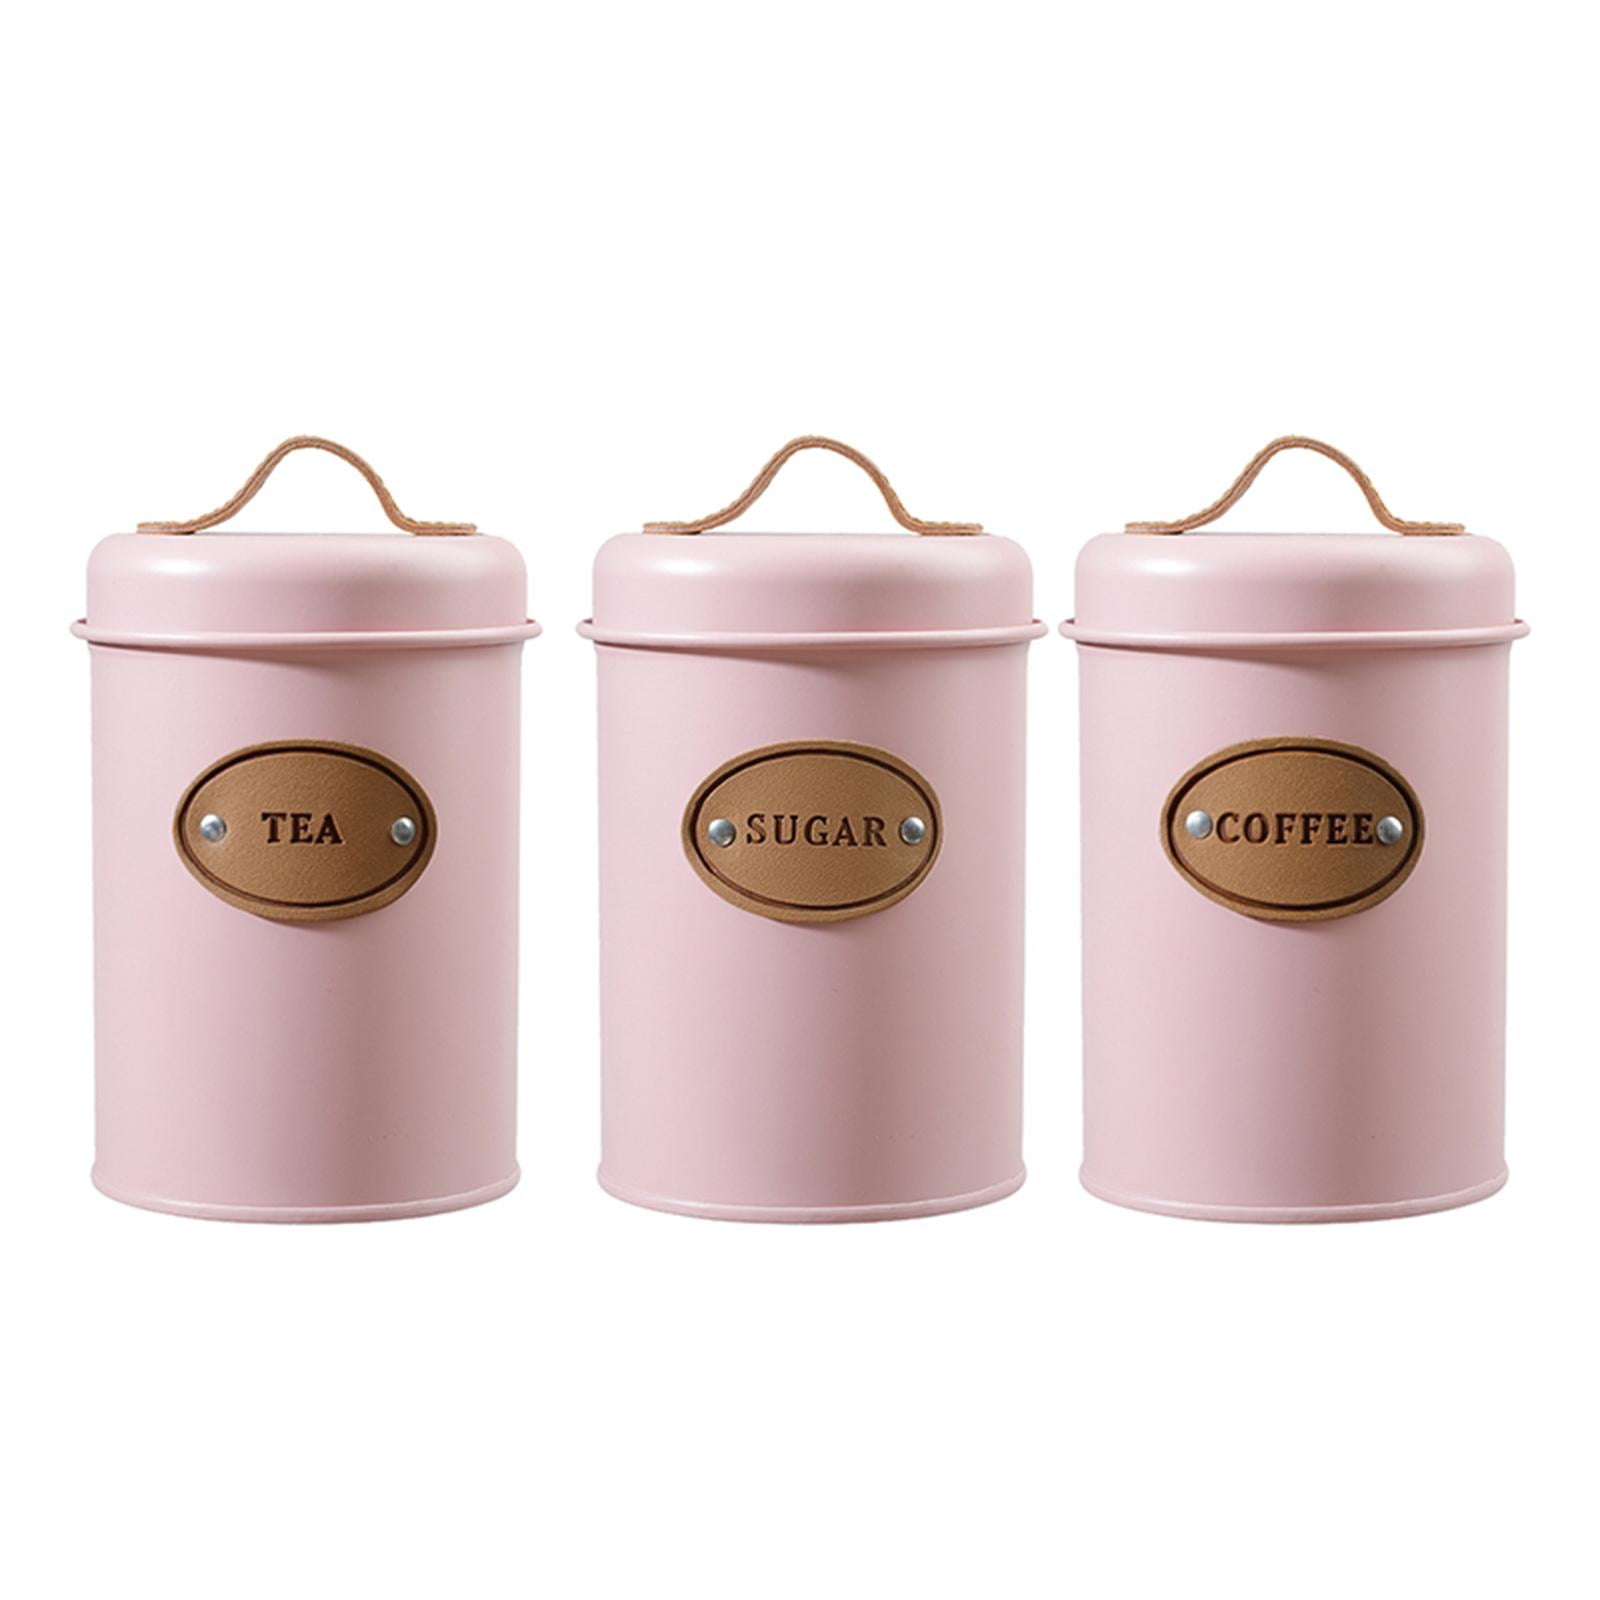 Paper Food Containers - 5oz Food Containers - Pink (87mm) - 1,000 ct, Coffee Shop Supplies, Carry Out Containers